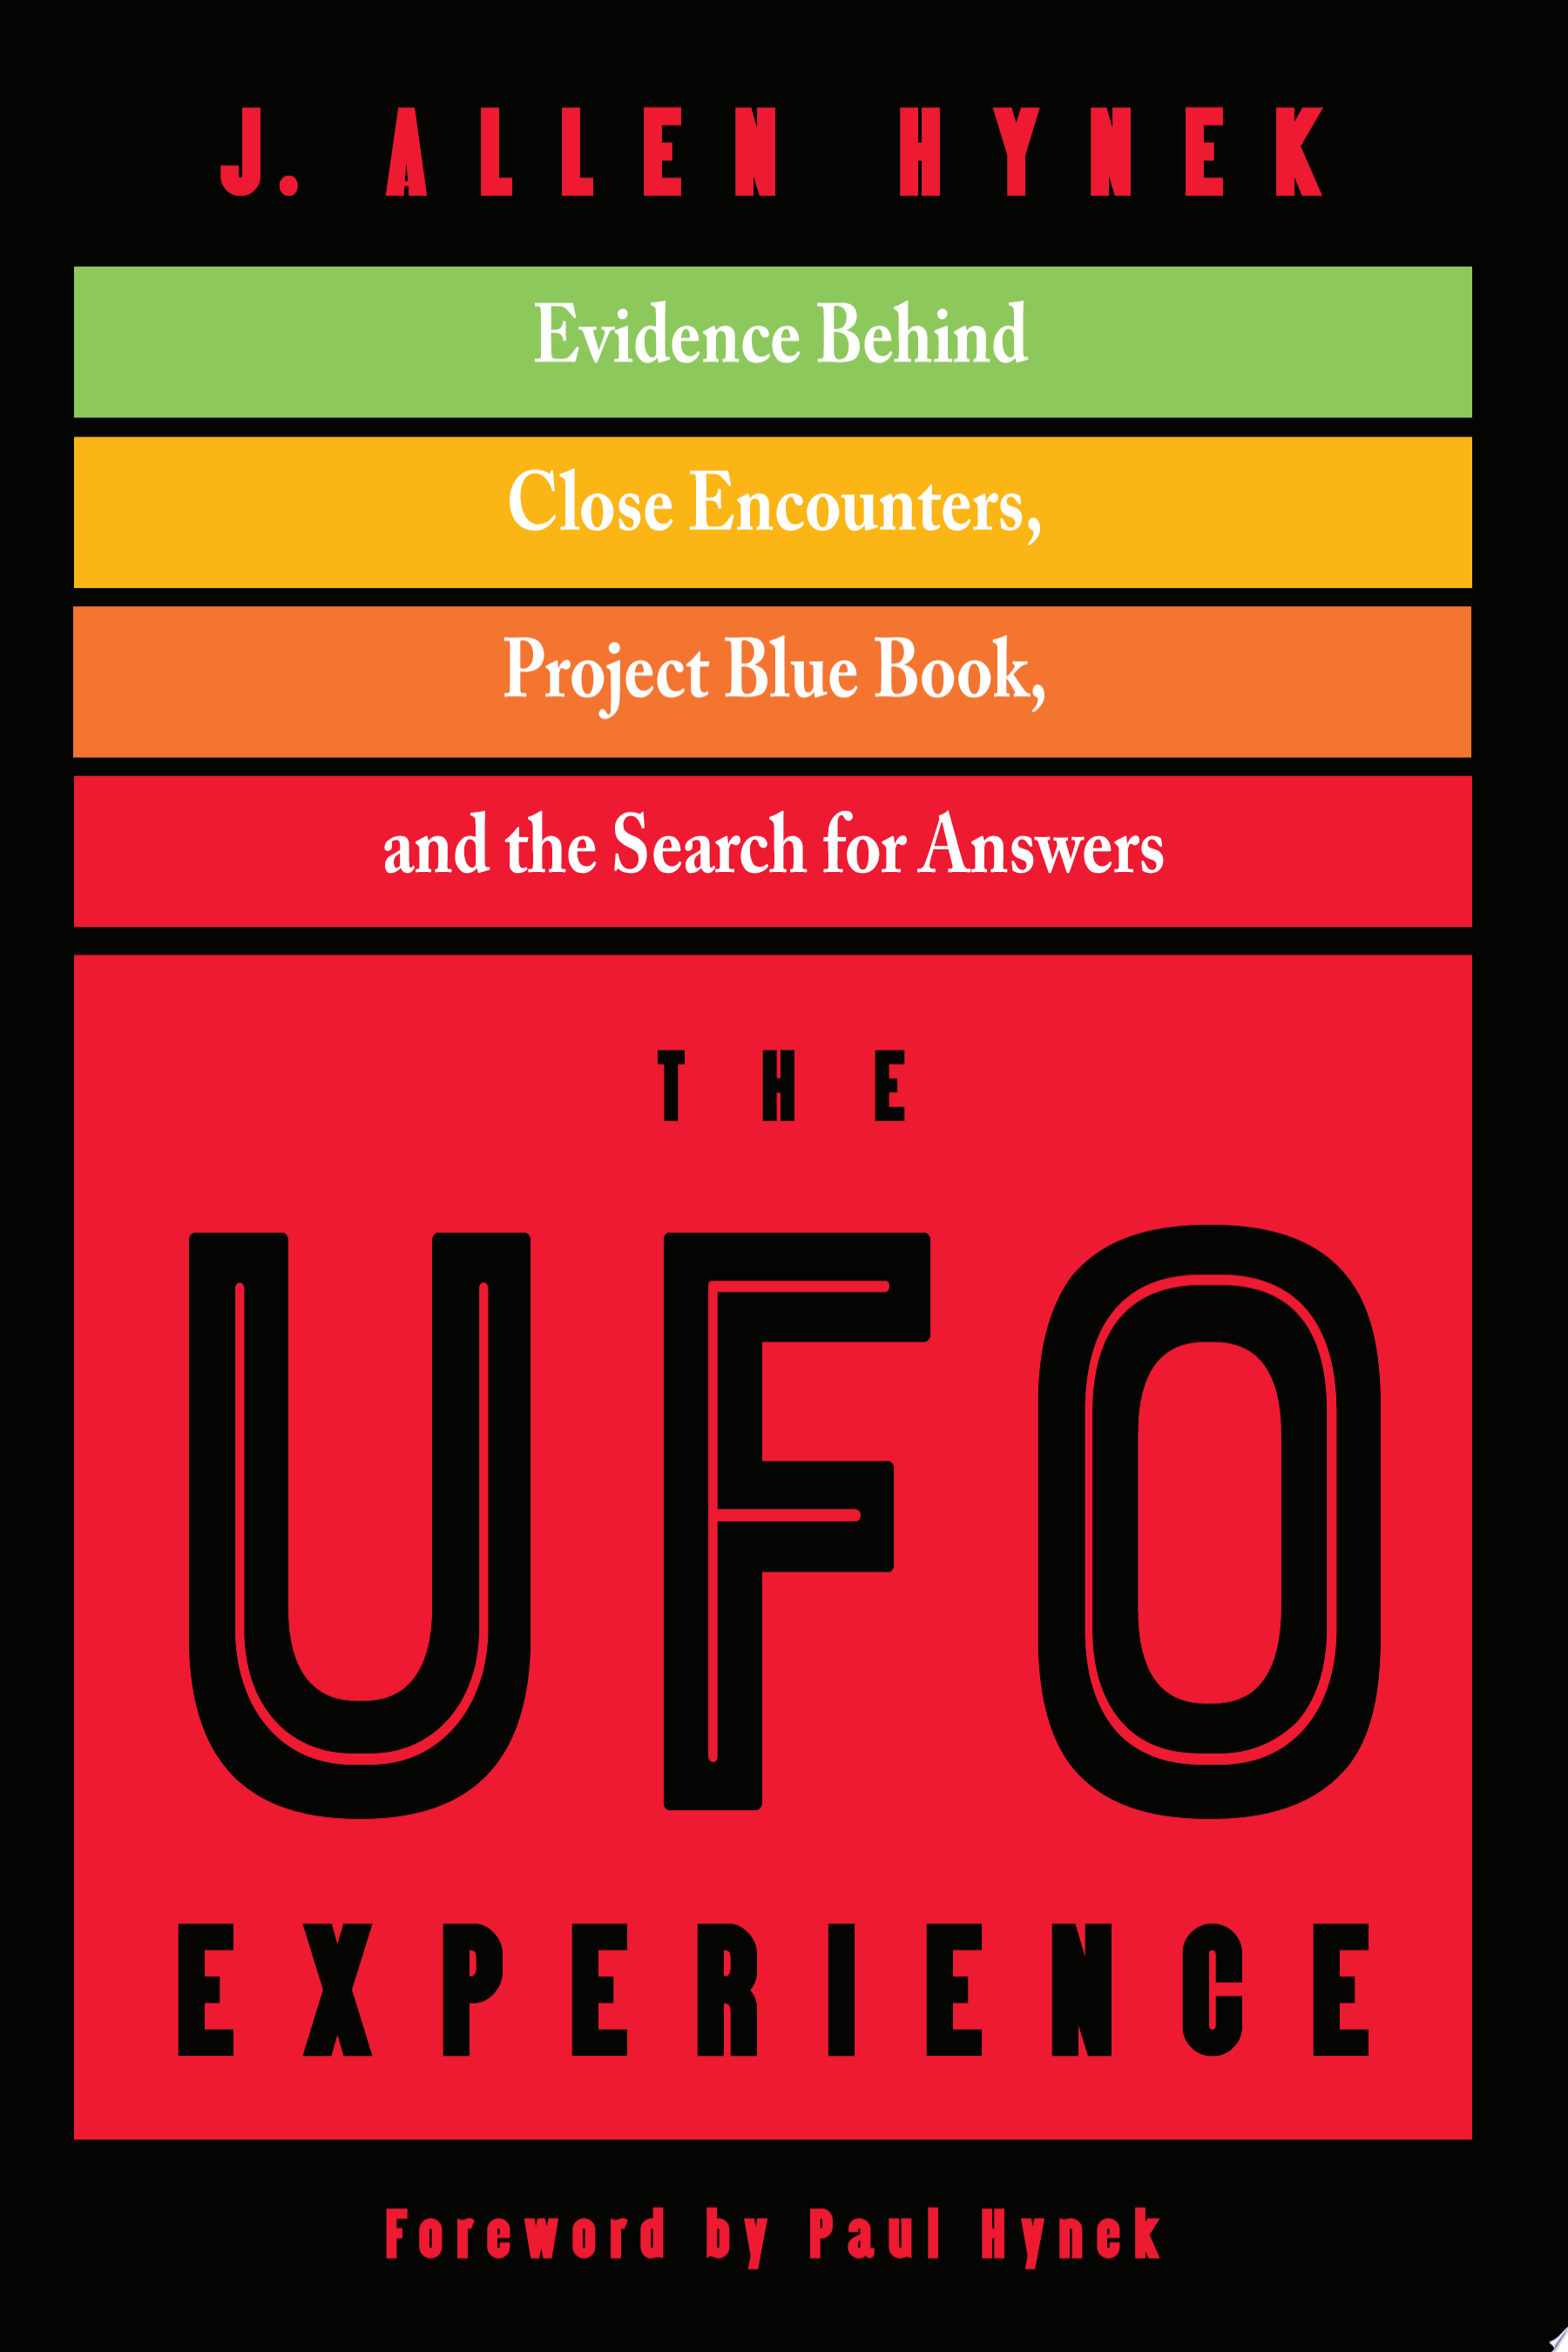 Image for "The UFO Experience"